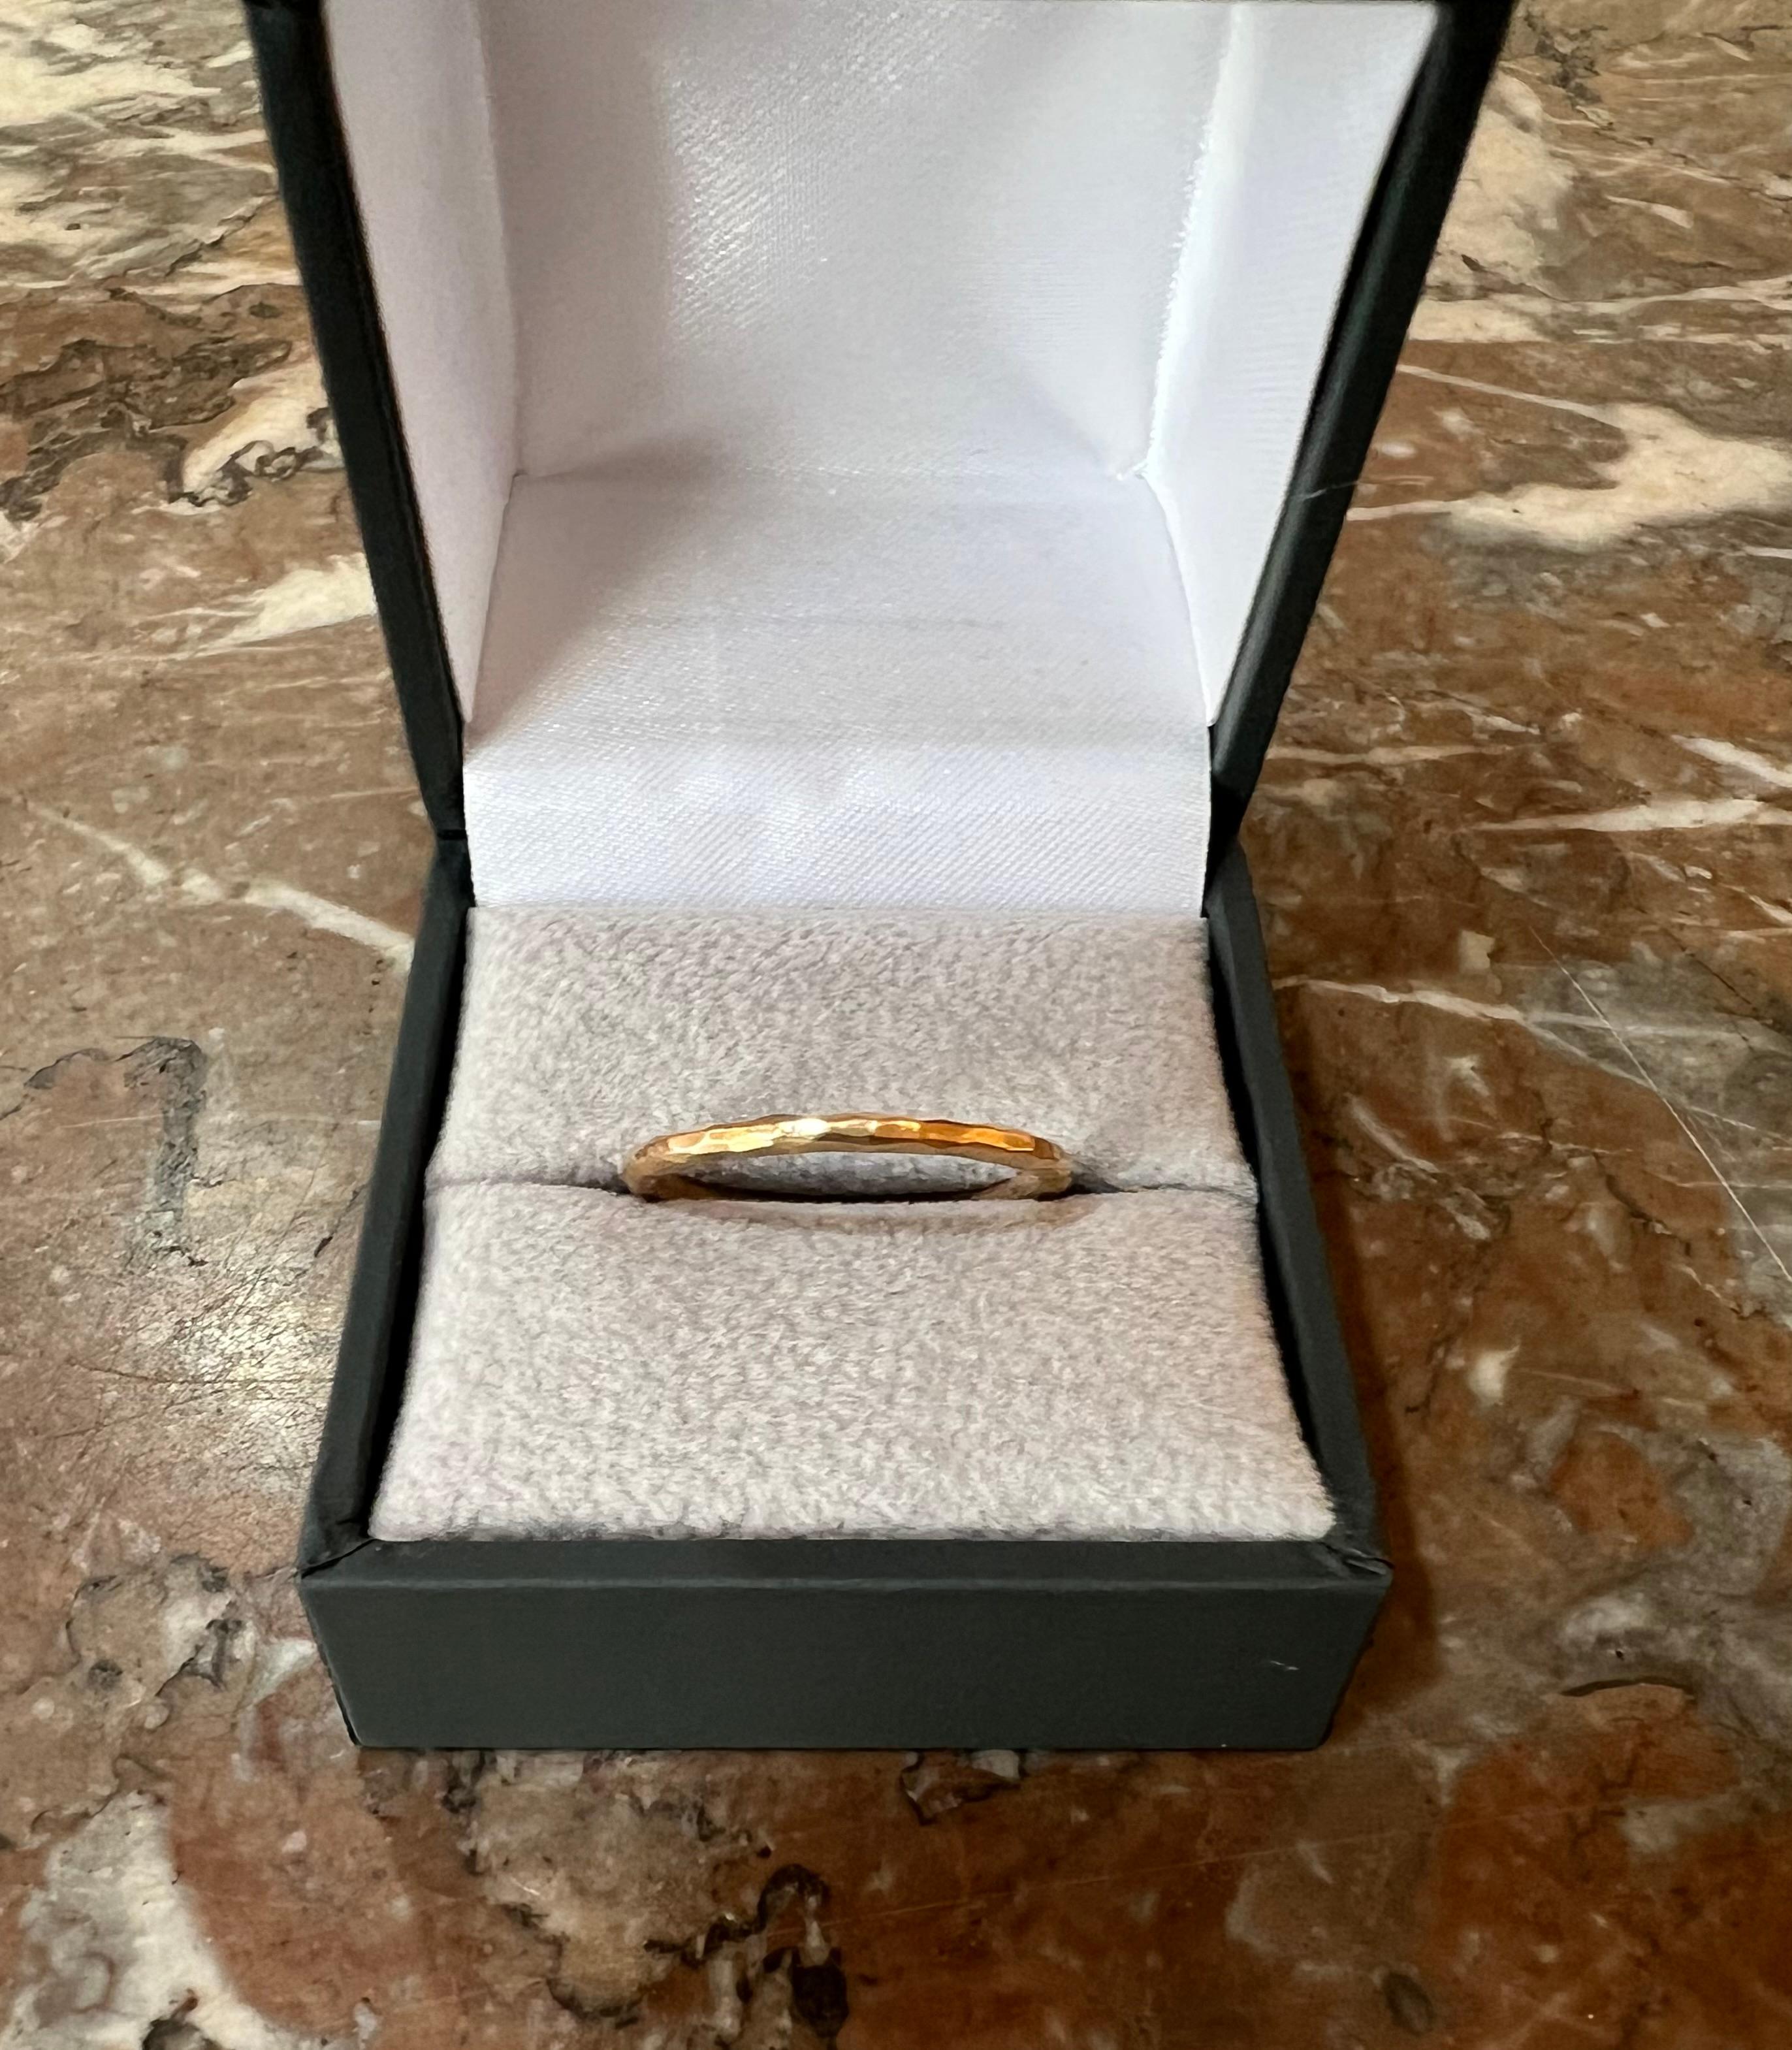 Wedding ring signed Tiffany & Co Paloma Picasso in textured yellow gold.

Dimensions: 1.84 x 1.84 mm (0.072 x 0.072 inch)

Finger size: 56 (US: 7 1/2)

Ring weight: 2.6 g

Italian work circa 2010

18 carat yellow gold, 750/1000th

Although we take